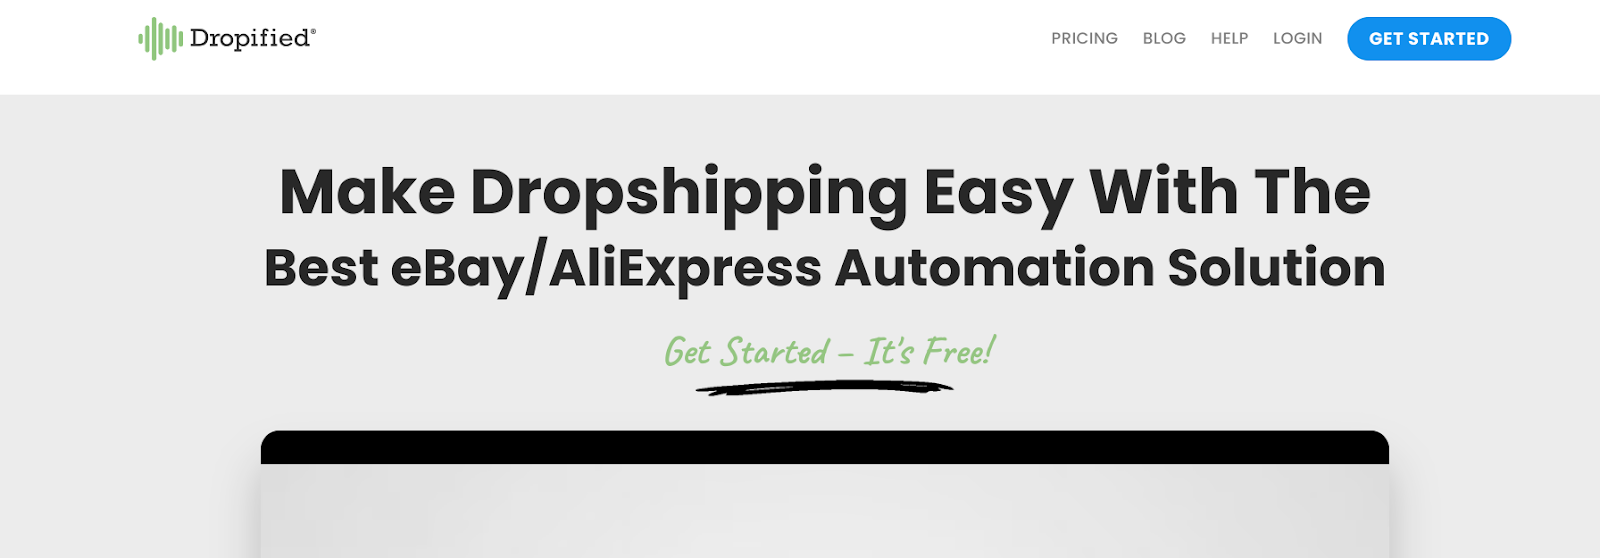 making dropshipping easy with AliExpress 